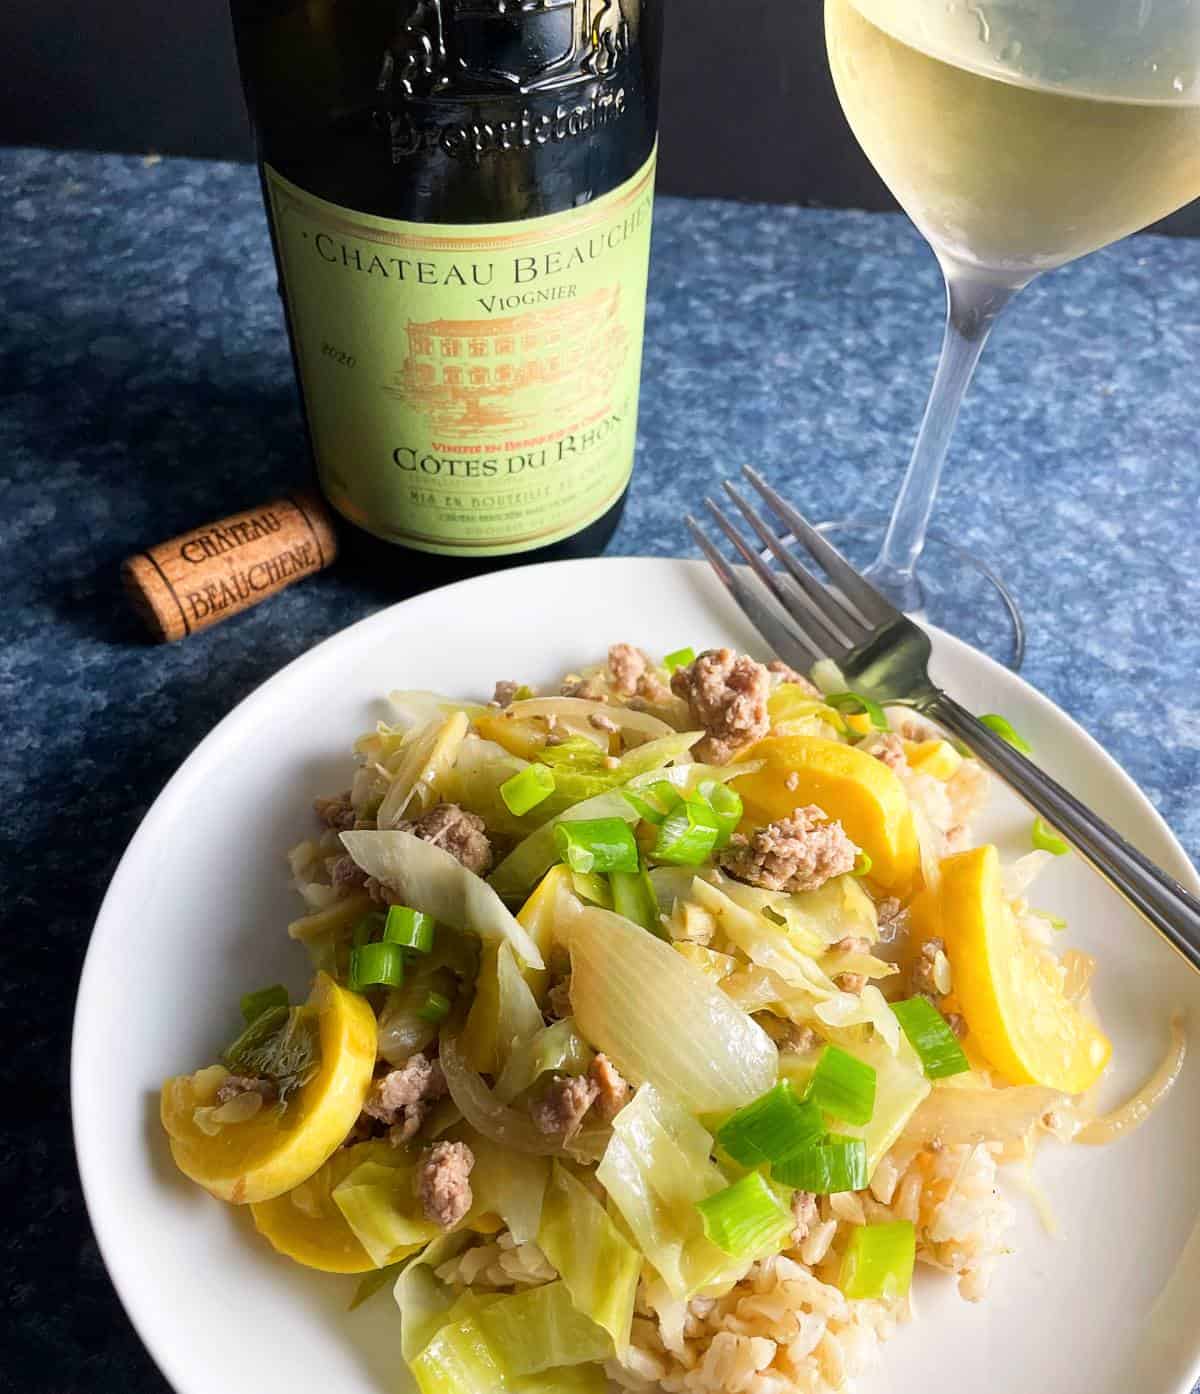 ground pork stir fry with summer squash, served on a white plate, along with a Viogner white wine.